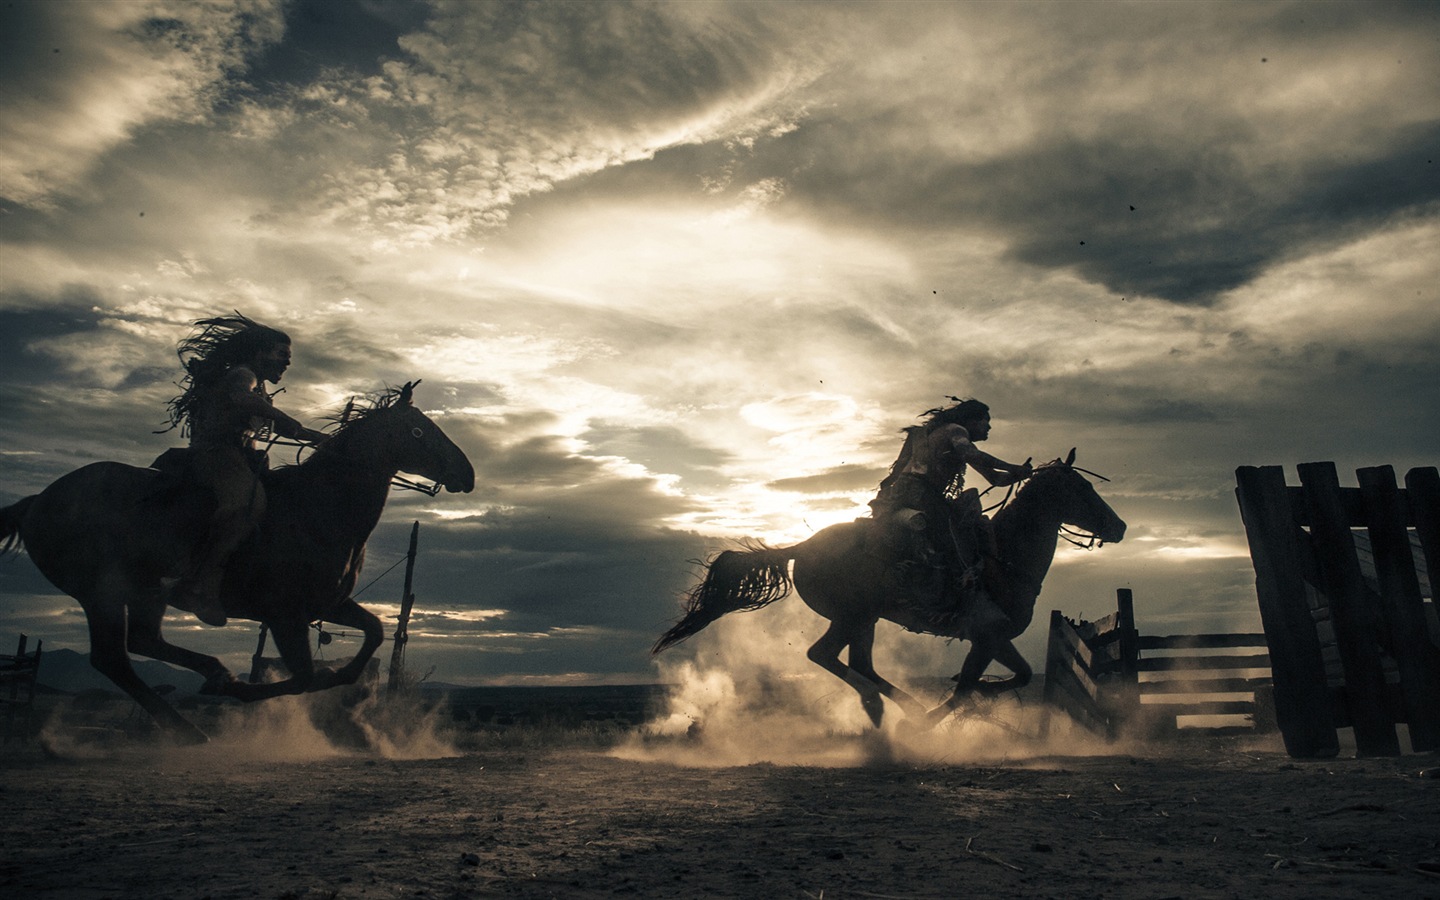 The Lone Ranger HD movie wallpapers #3 - 1440x900